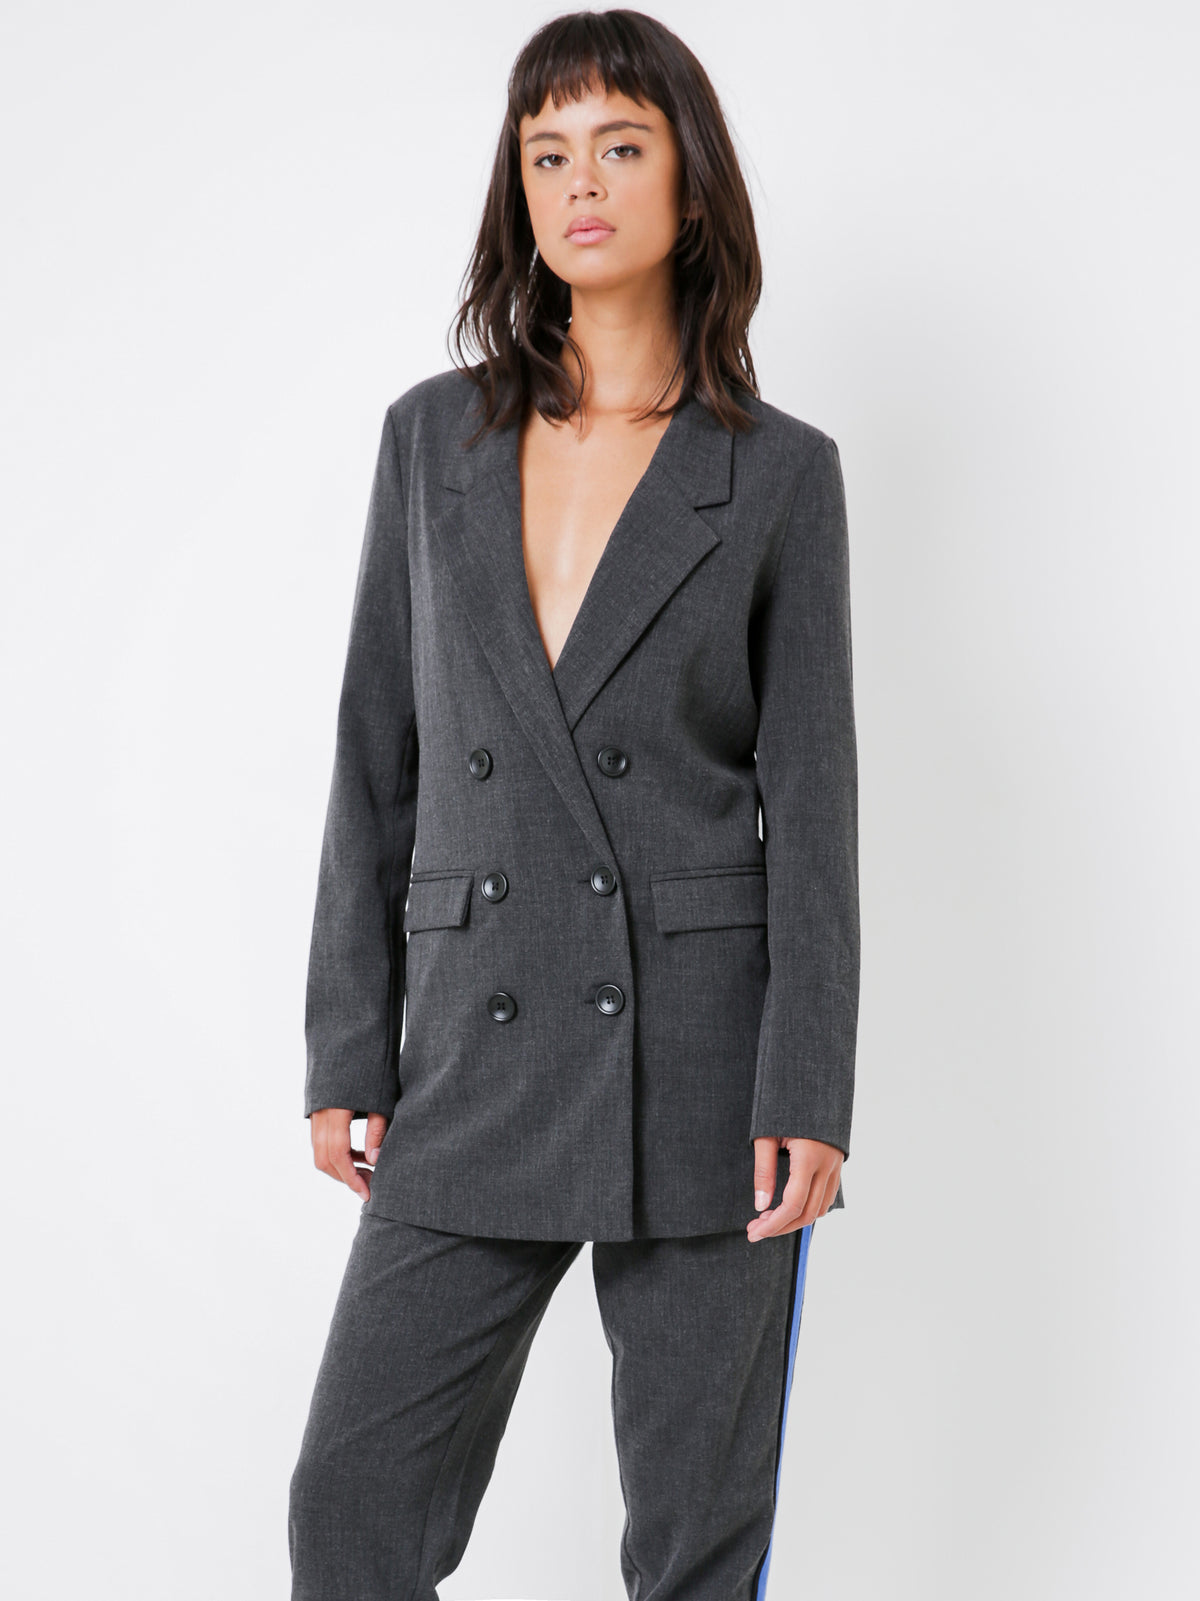 Double Breasted Blazer in Charcoal